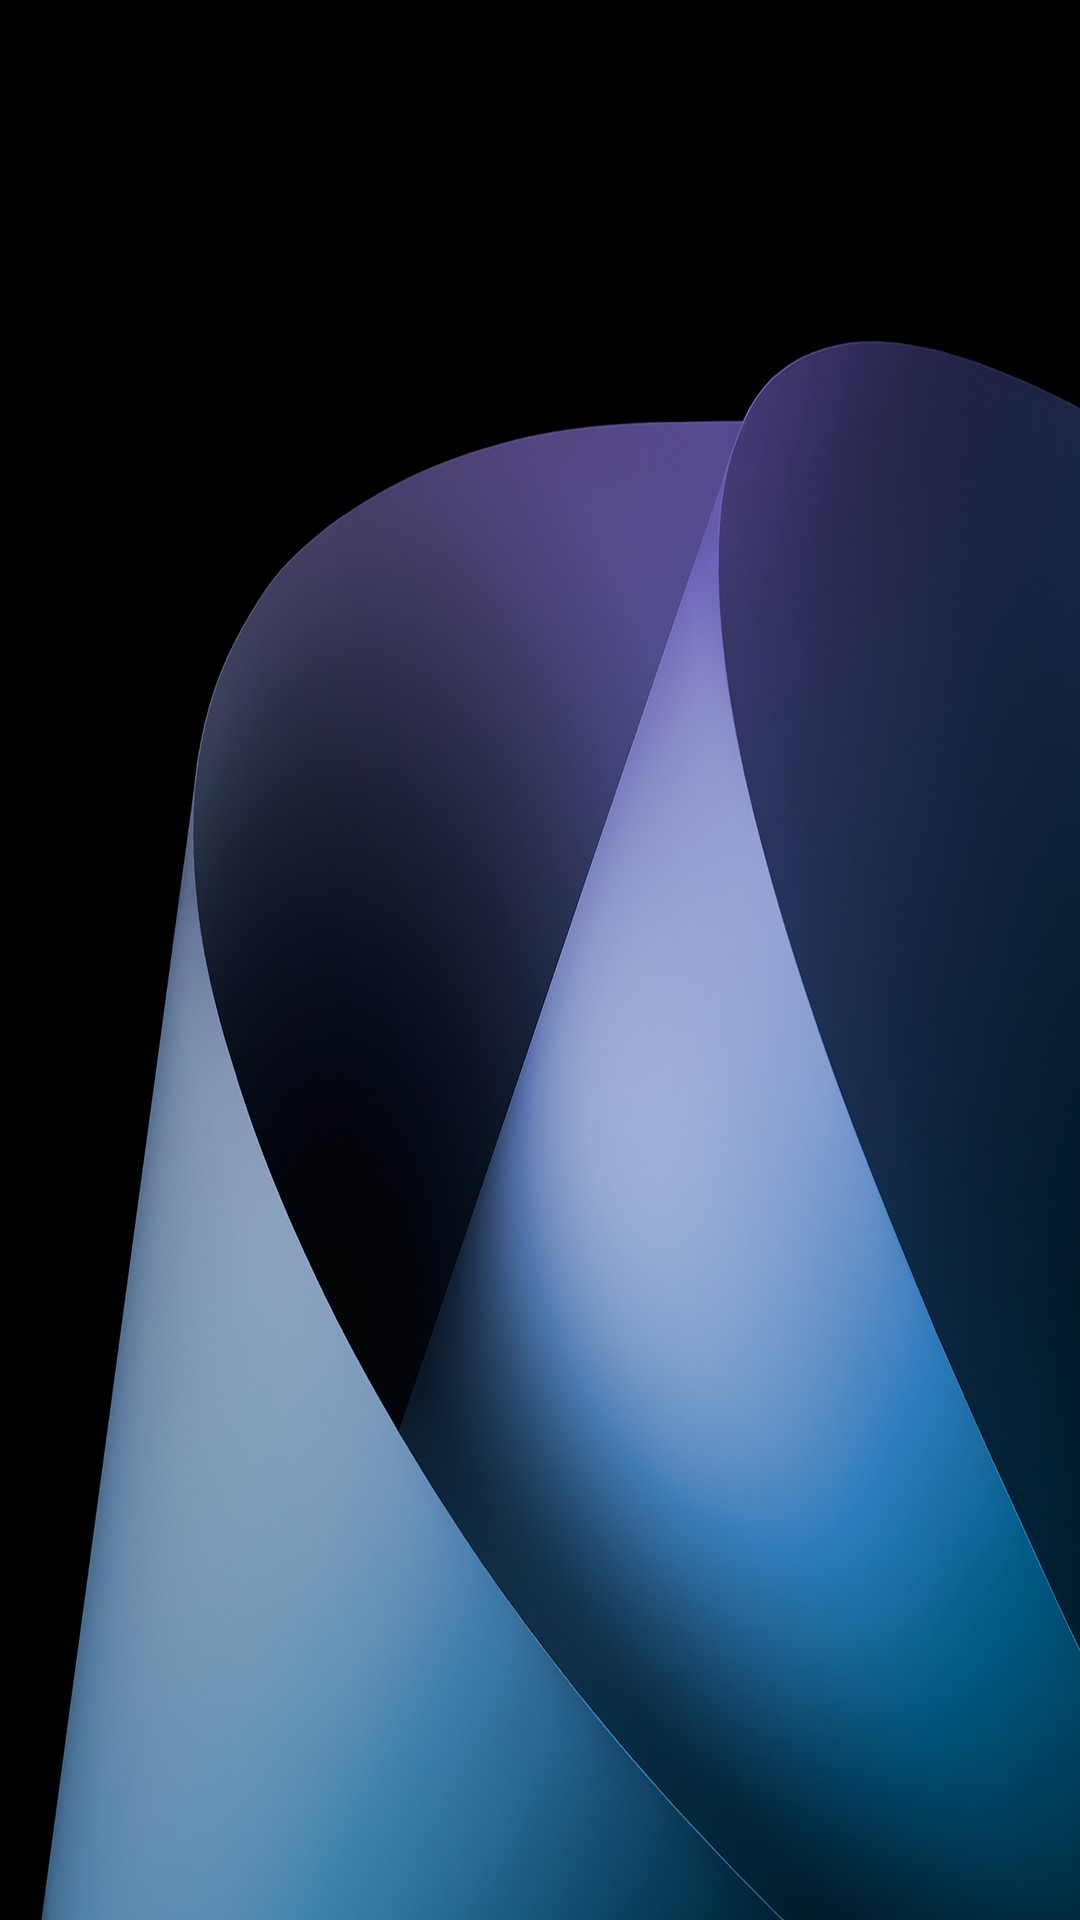 Android P Stock Wallpaper 10 - [1080x1920]